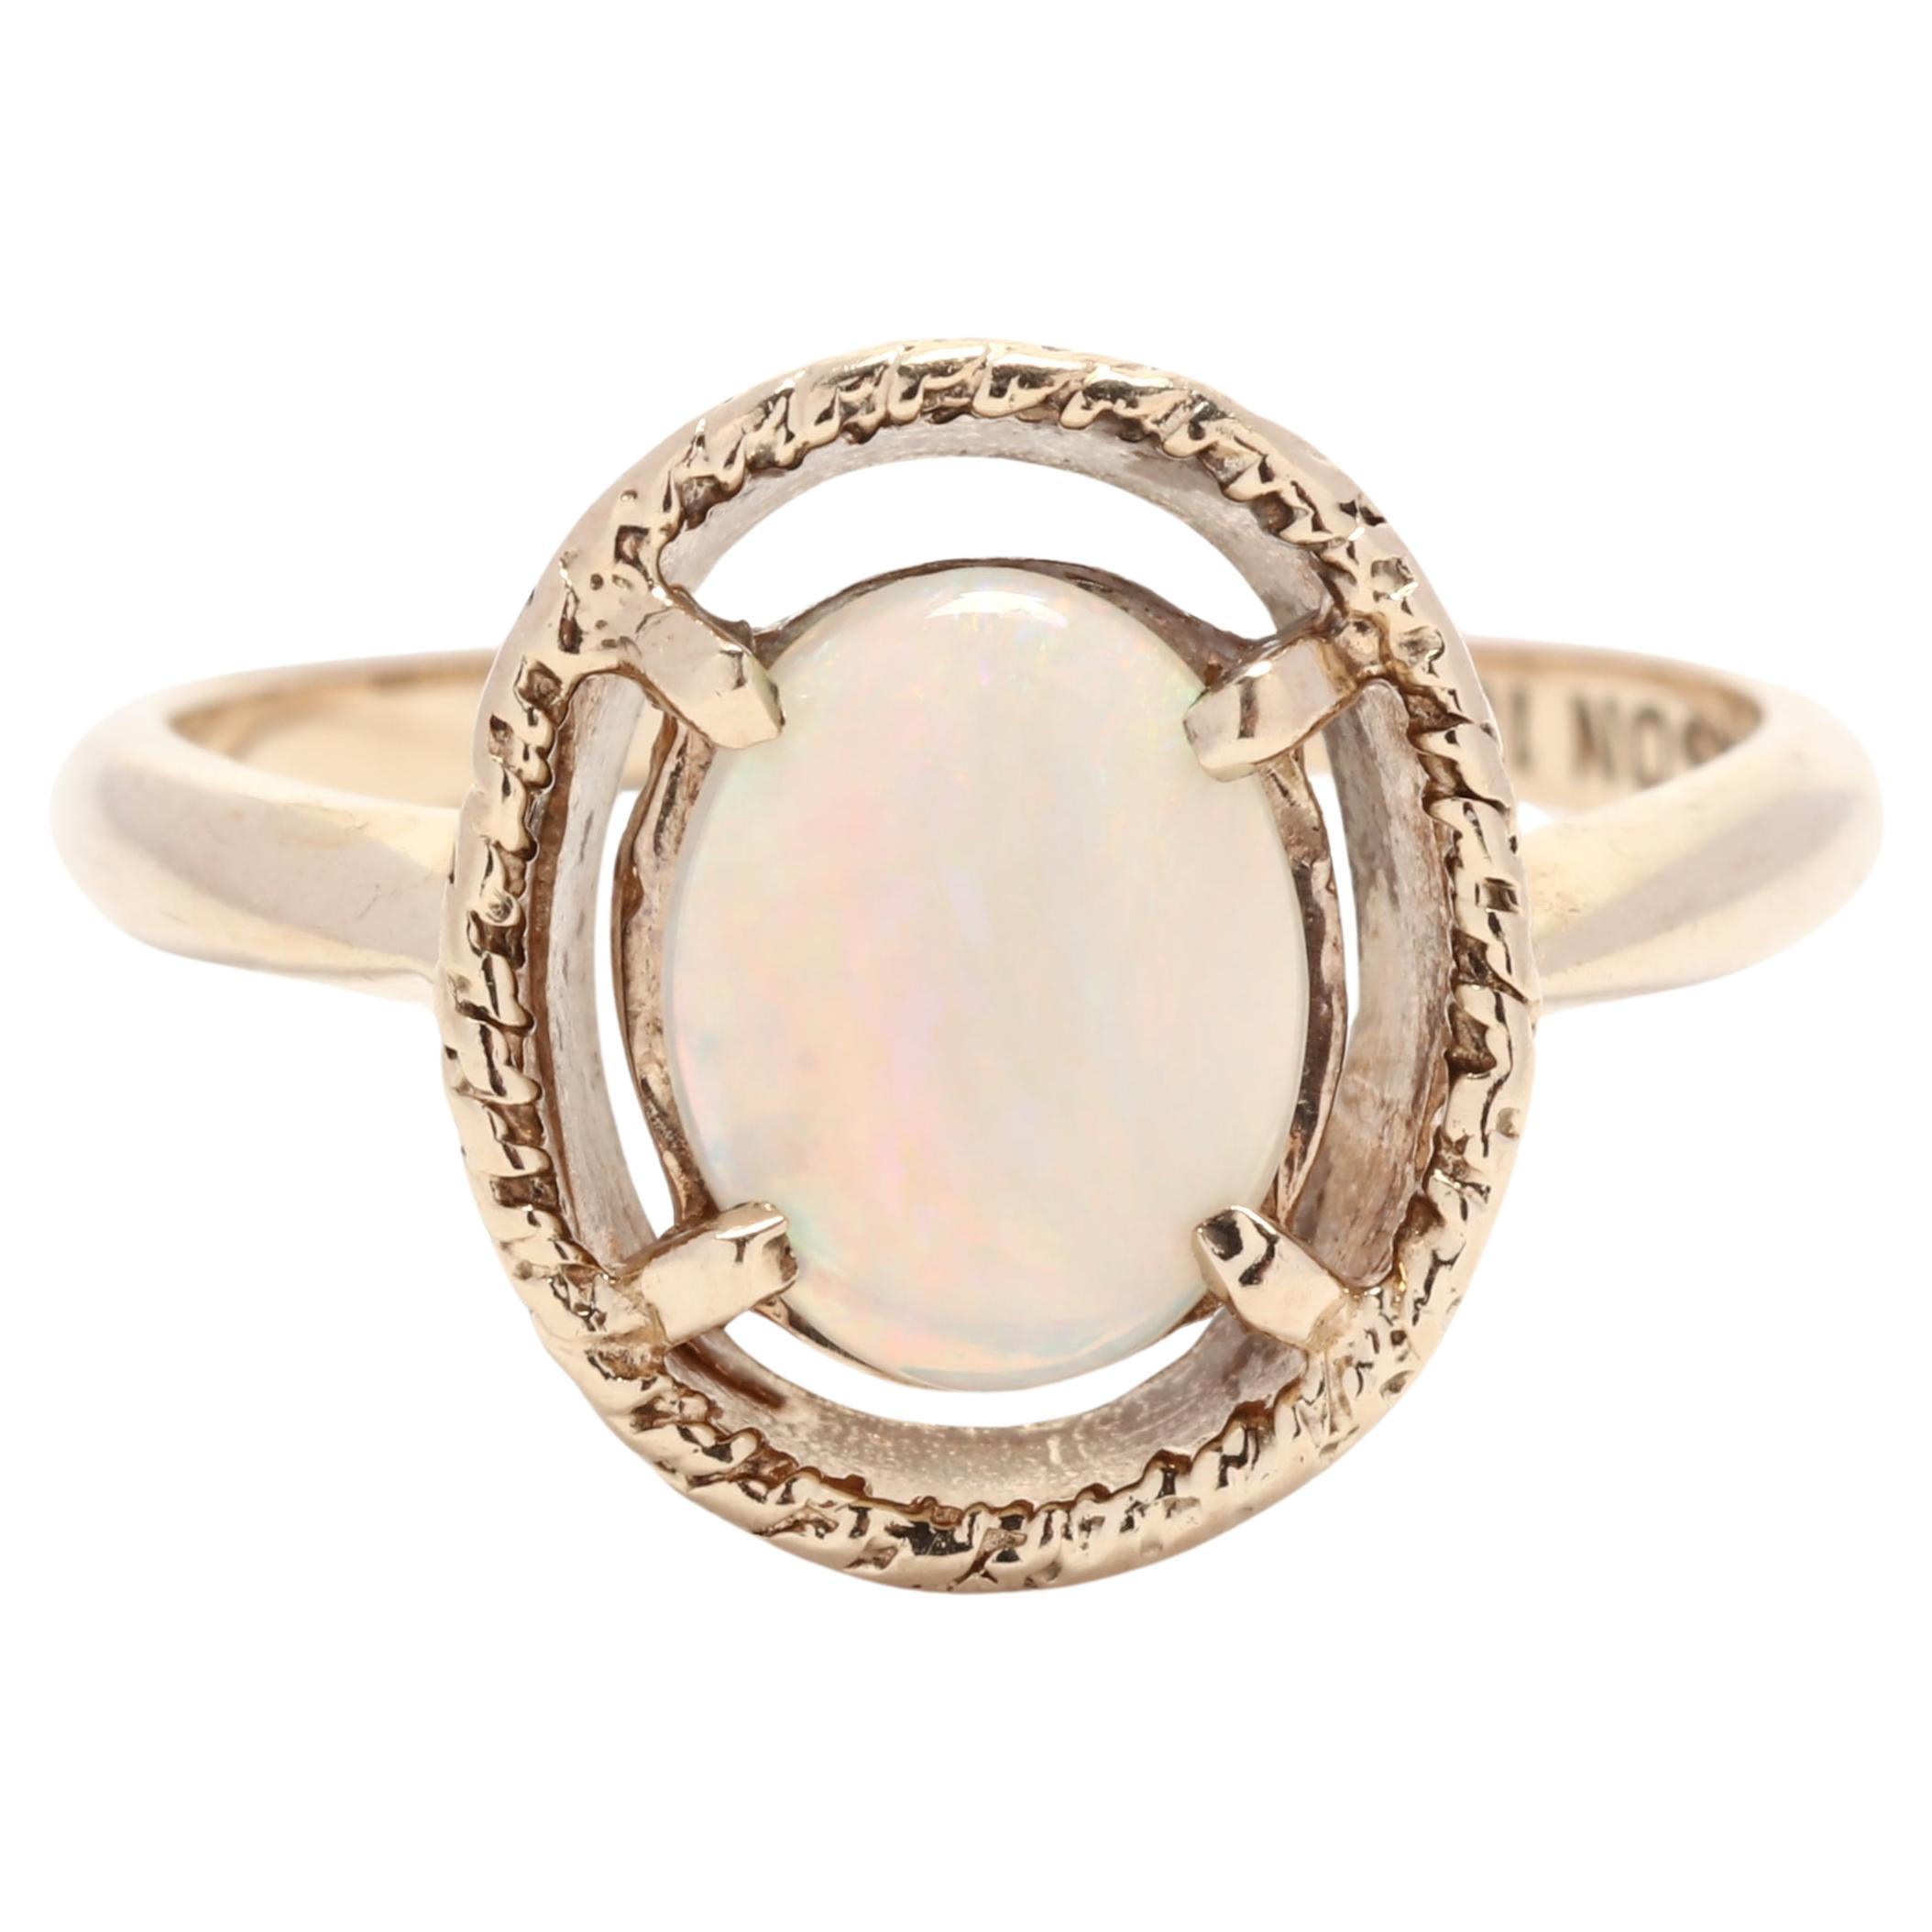 Vintage 1.10ct Oval Opal Gold Ring, 10K Yellow Gold, Ring Size 5.5, Rainbow Opal